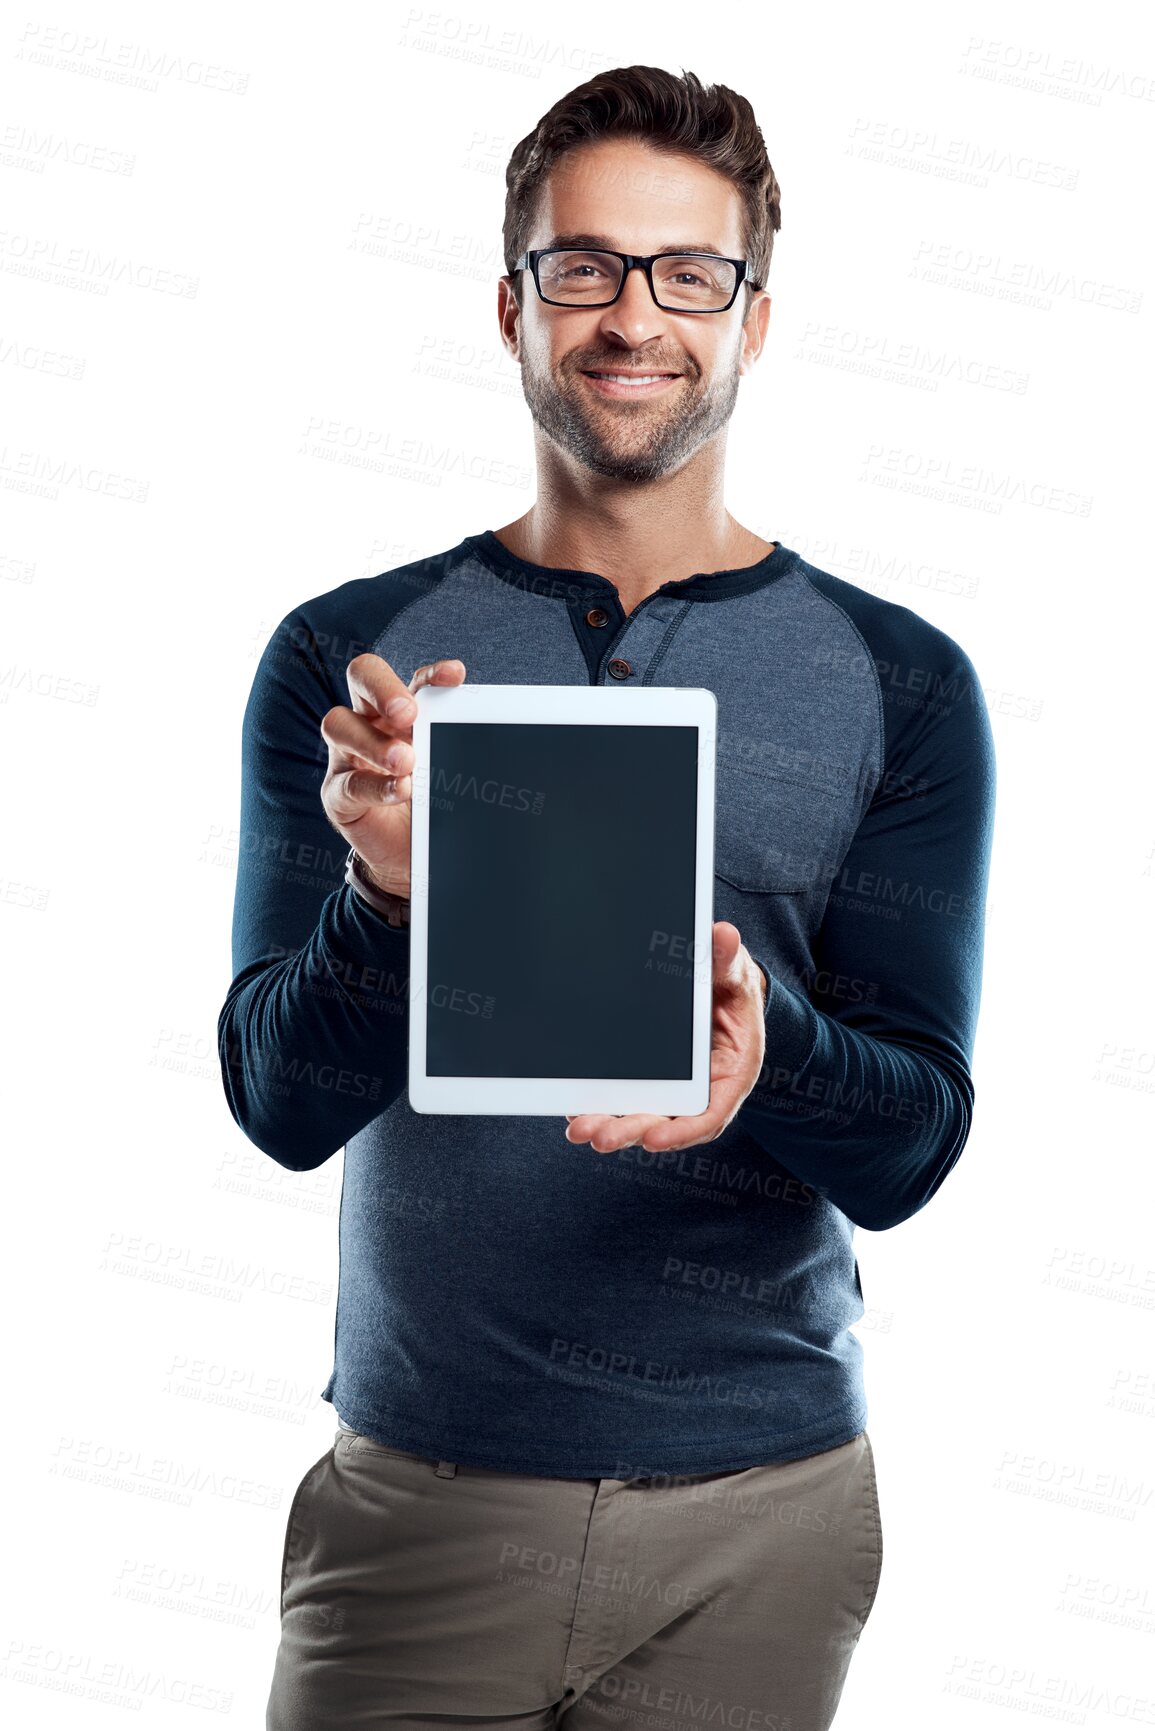 Buy stock photo Tablet screen, mockup and portrait of business man on transparent background for networking, social media and internet. Digital, technology and online with male employee isolated on png to show app